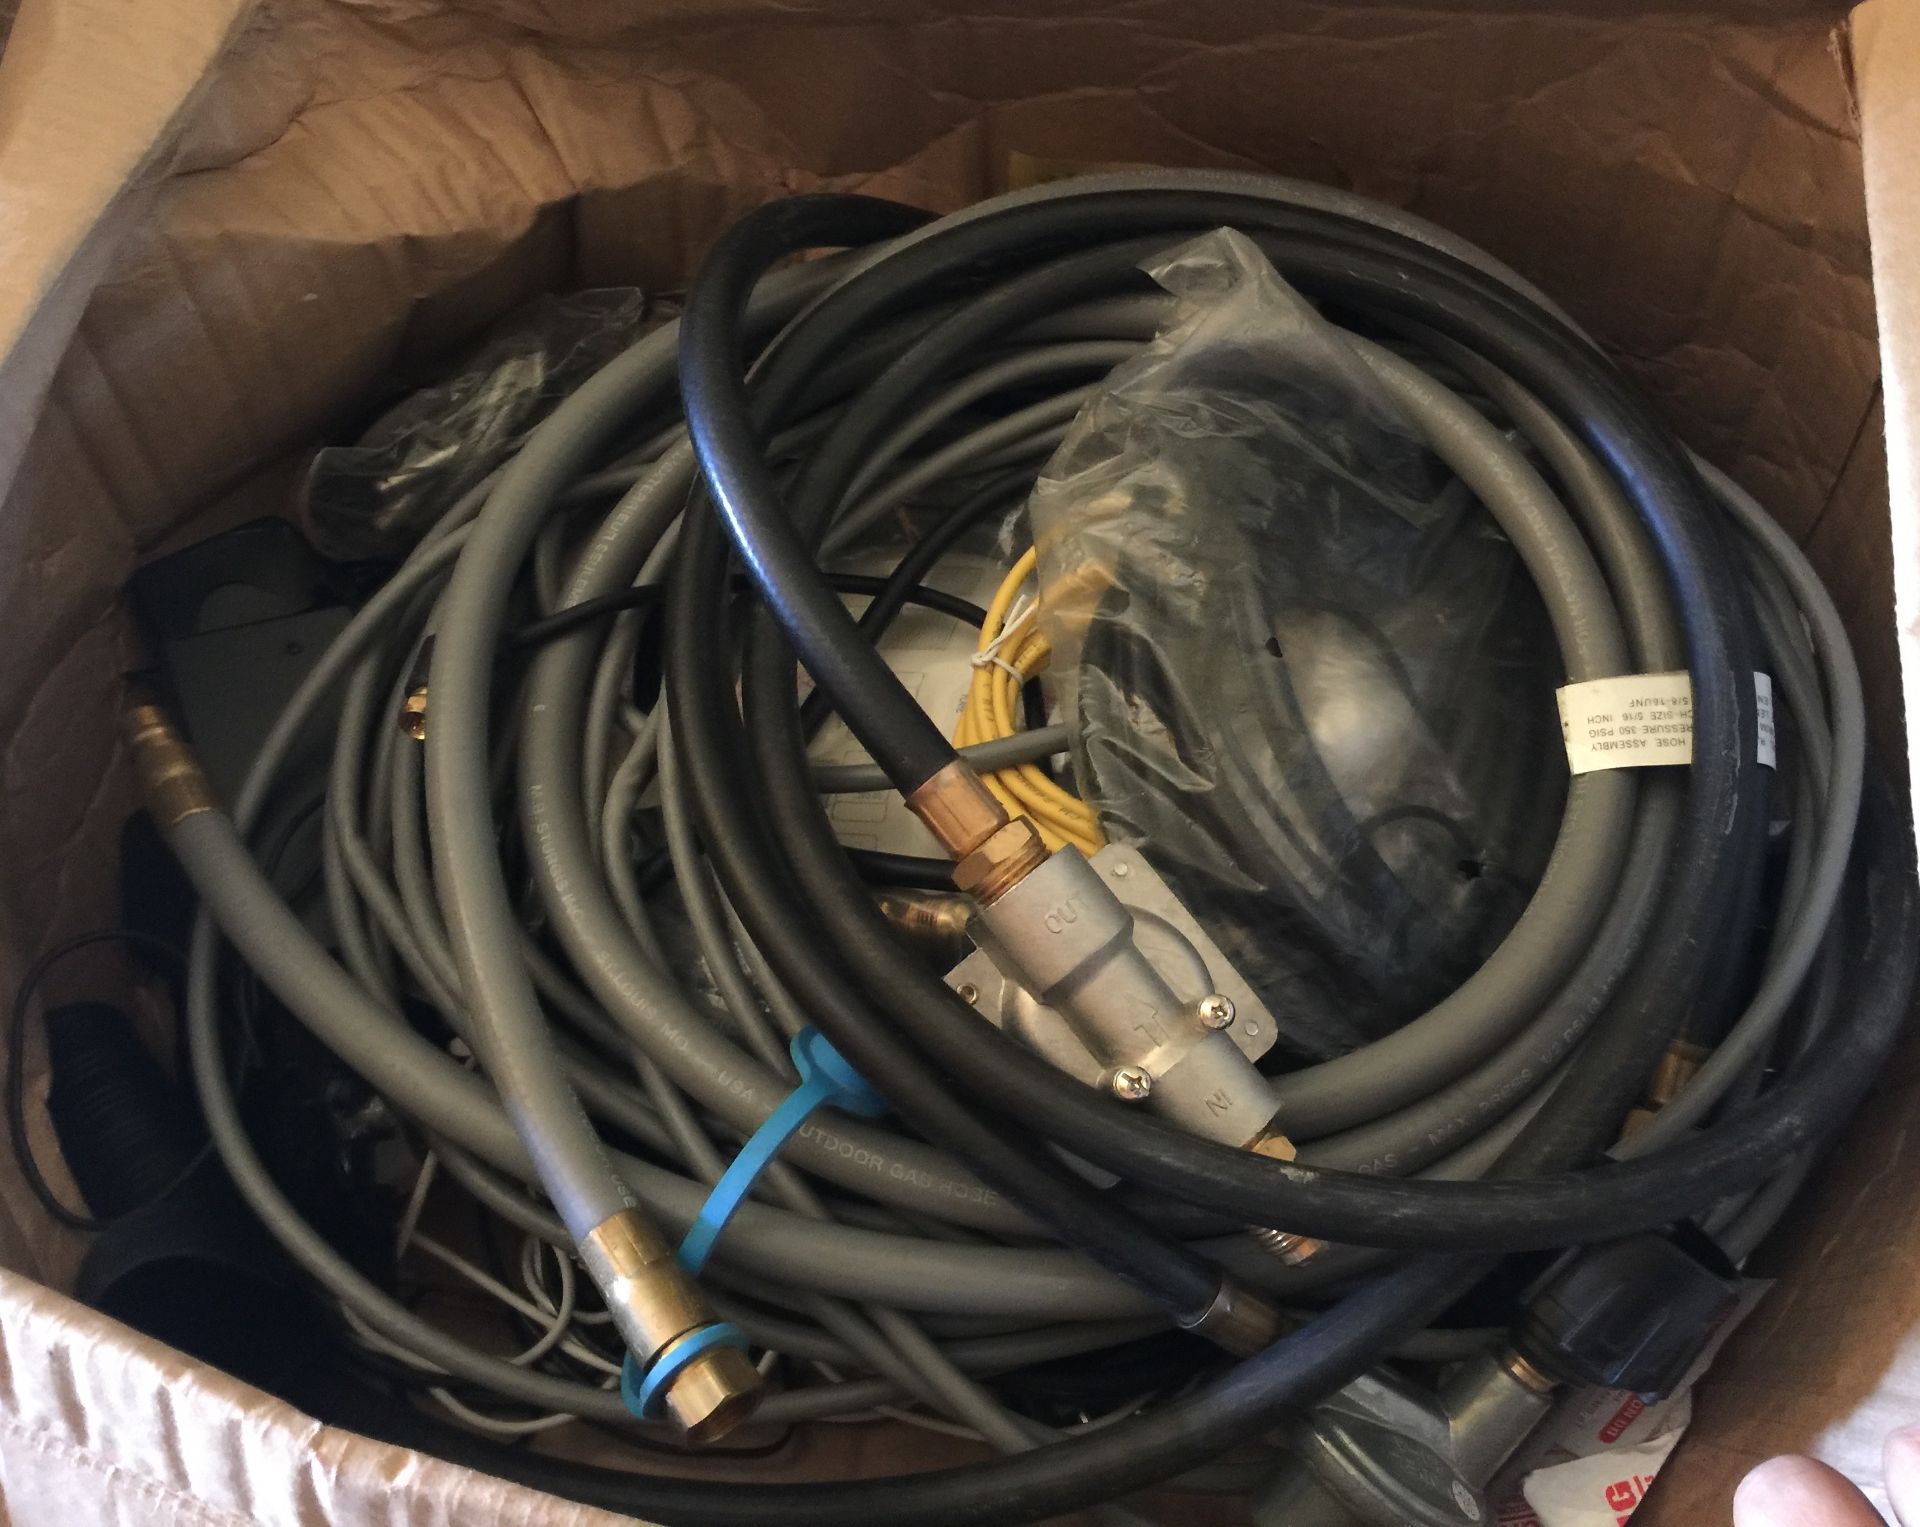 BOX BRAND NEW INDUSTRIAL CONNECTORS, WIRES, ETC